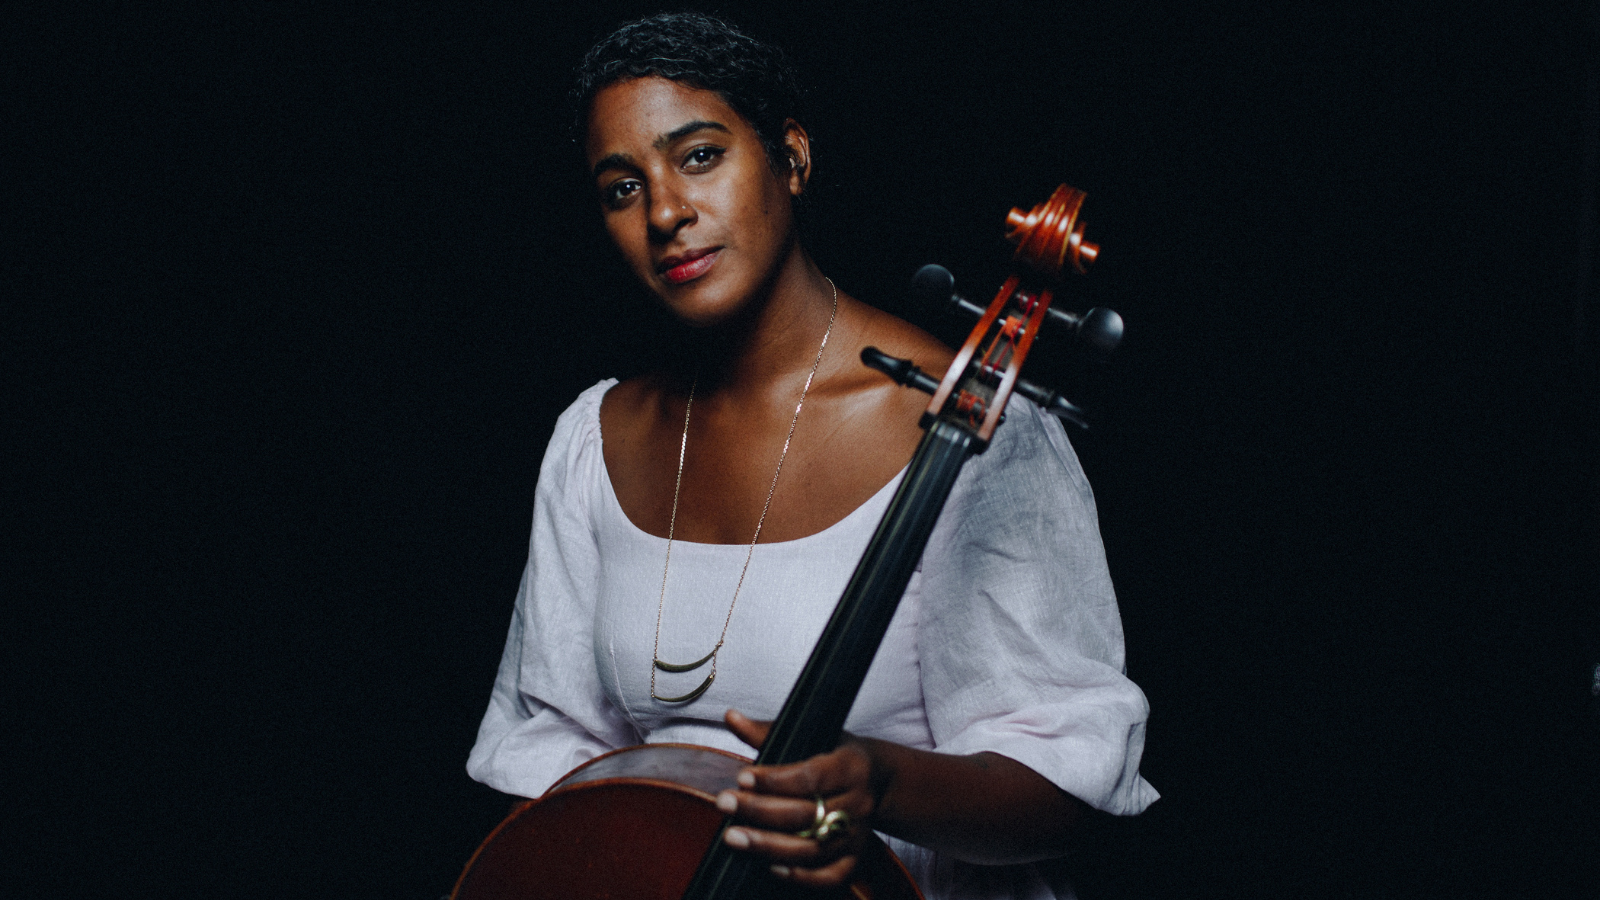 Leyla McCalla looks directly into the camera with a soft smile, wearing a bright white top with wide sleeves and a thin silver necklace and holding the neck of a cello. Leyla glows against a dark black background.